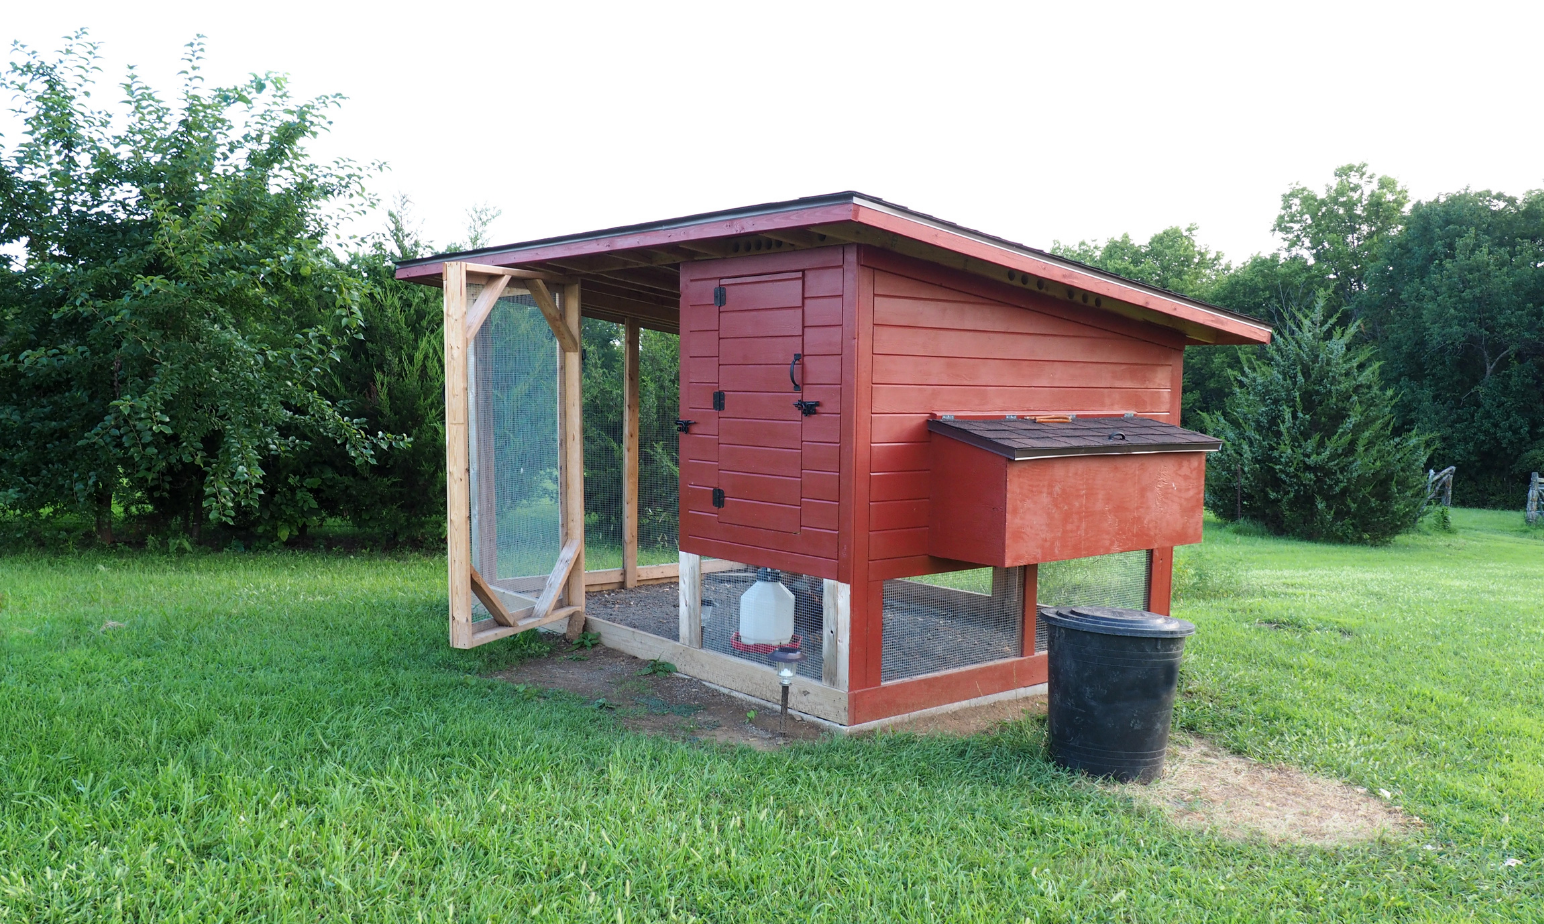 image of chicken coop for raising chickens and keeping chickens of different poultry breeds.